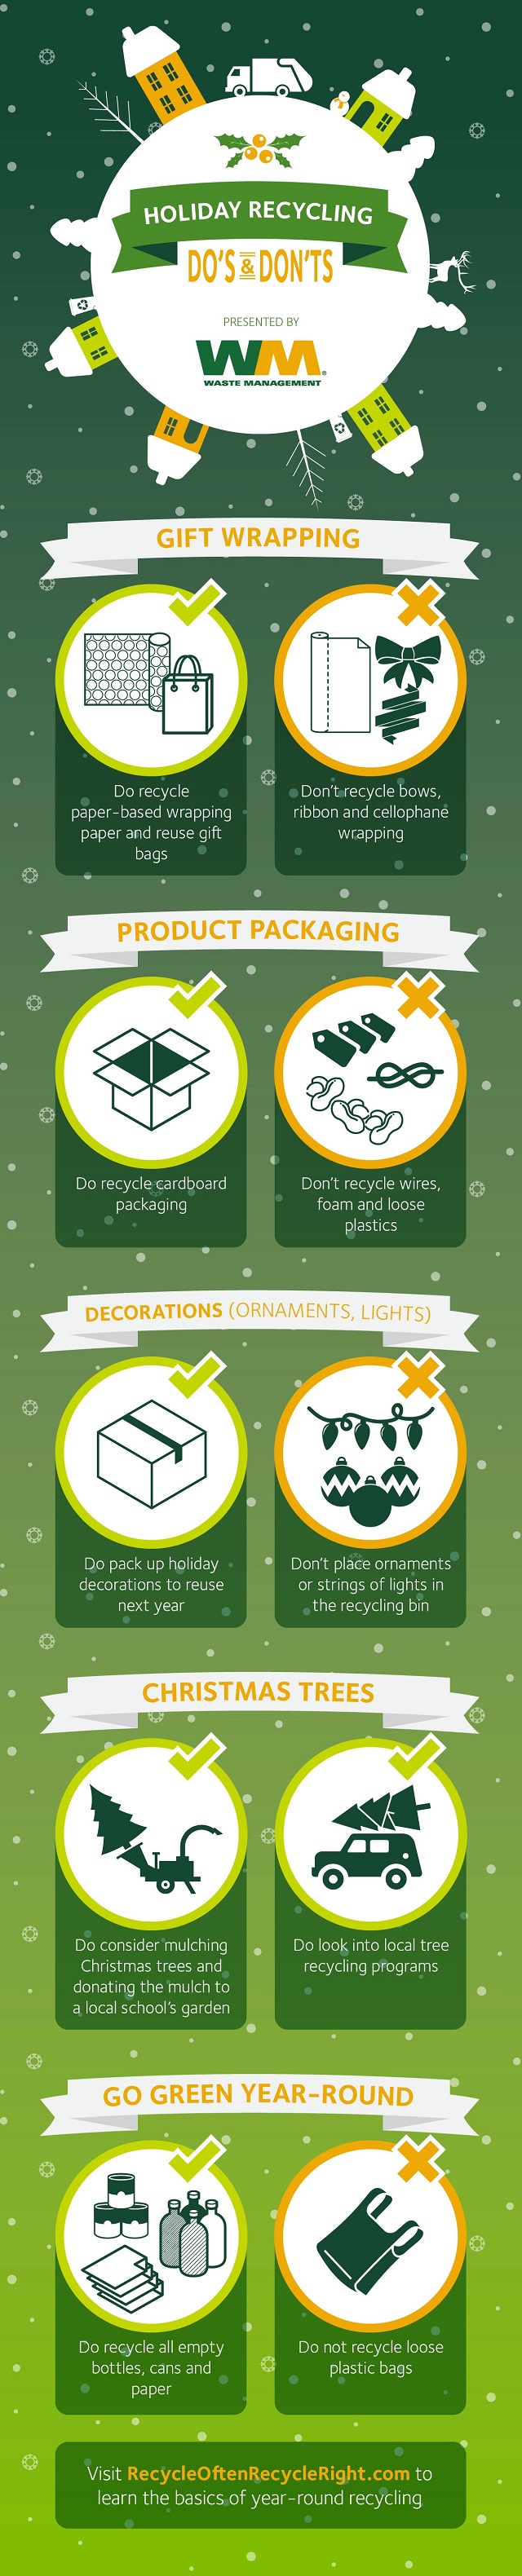 Holiday Waste Management Infographic